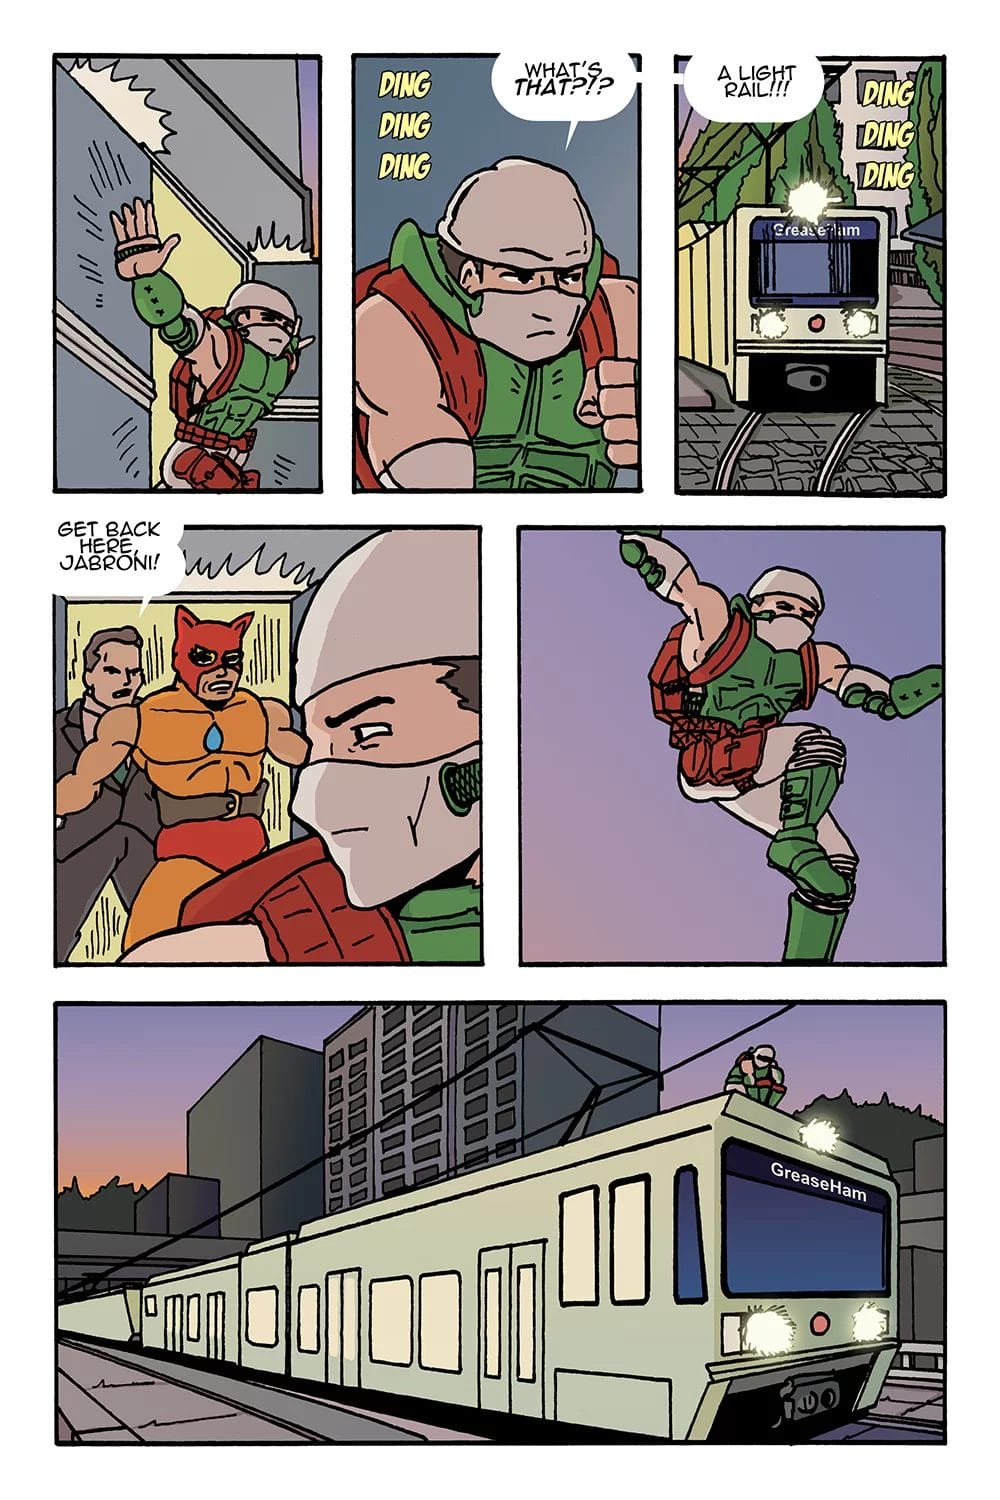 The ninja jumps on a light rail and escapes.